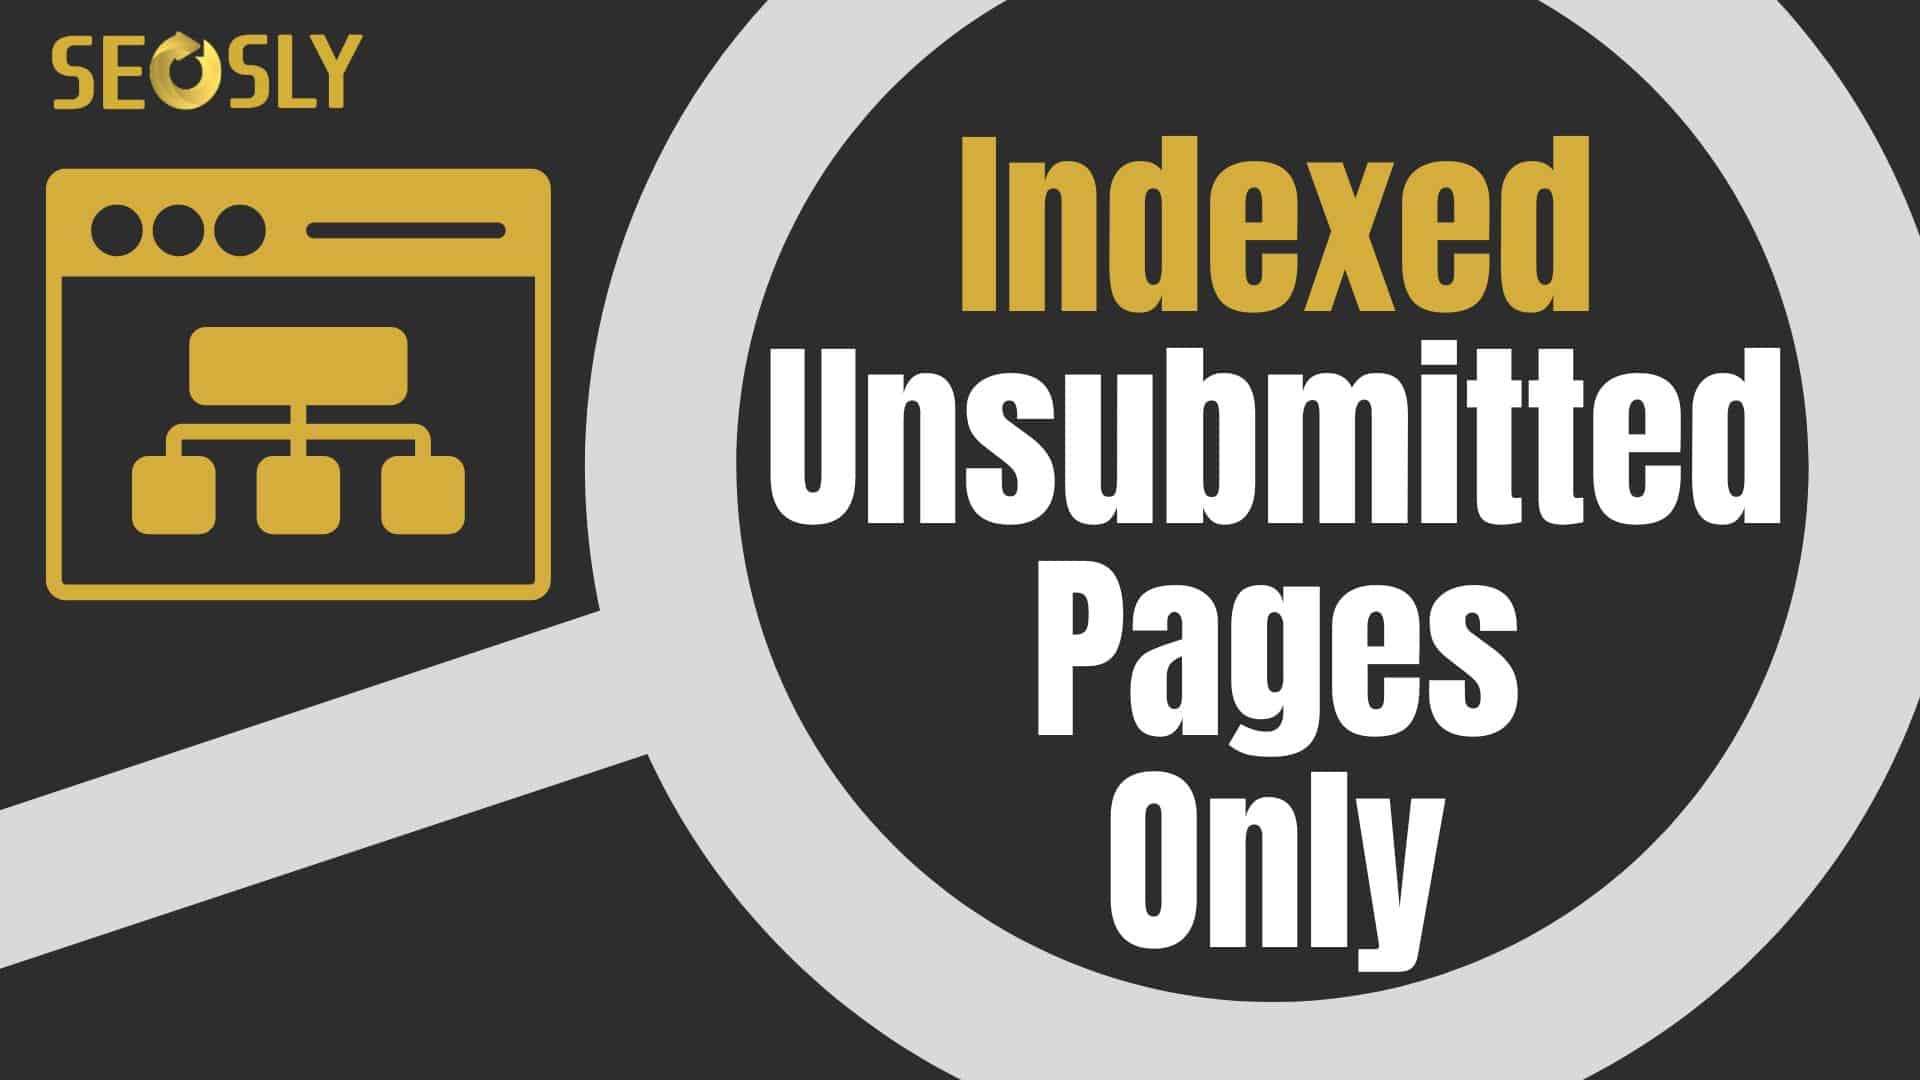 “Indexed, Not Submitted In Sitemap” Is Now “Indexed” In “Unsubmitted Pages Only” – SEOSLY